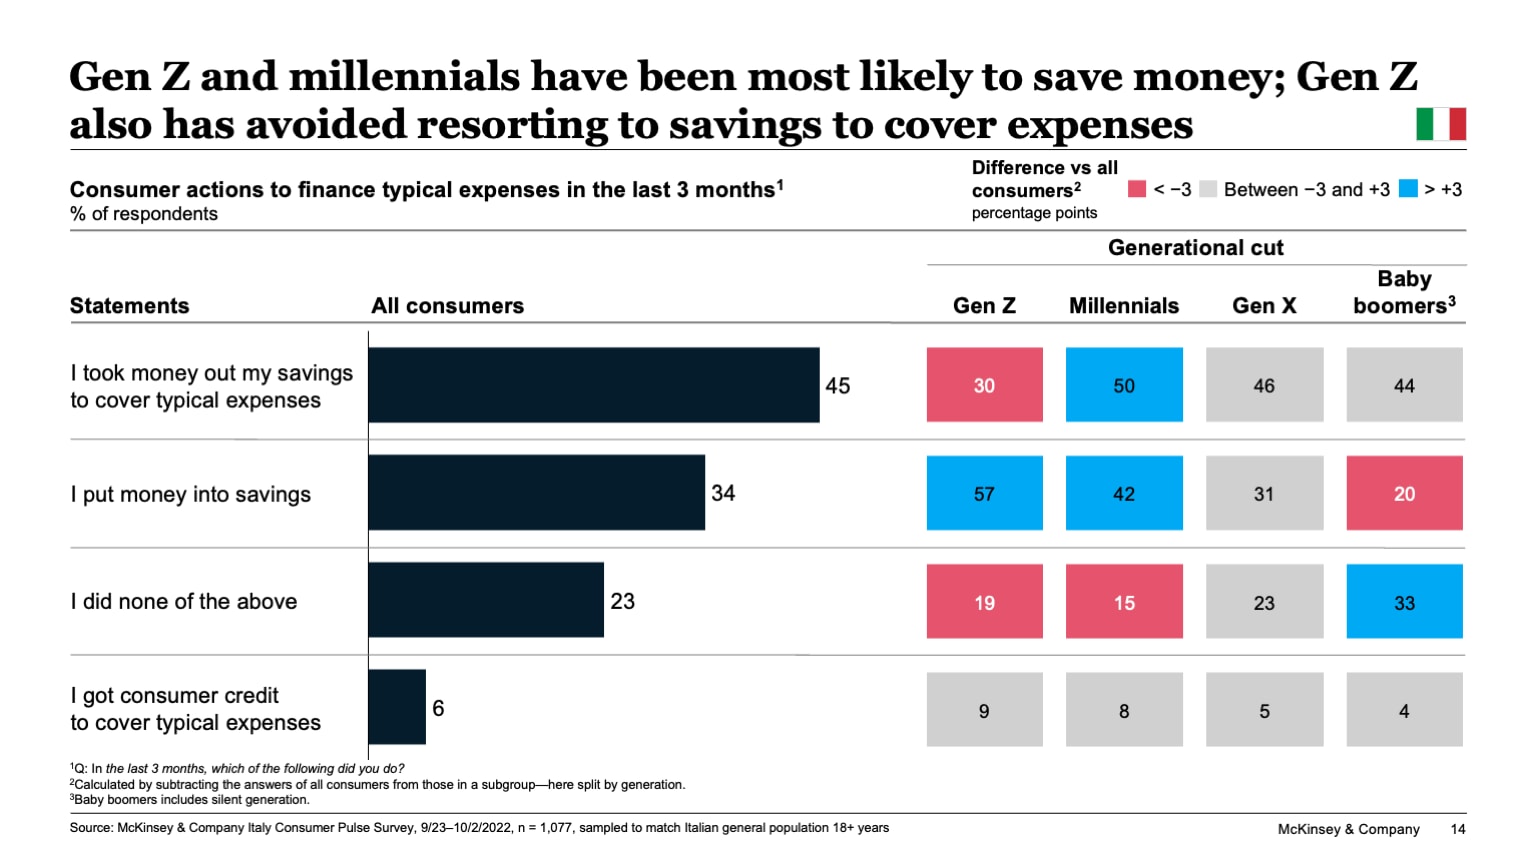 Gen Z and millennials have been most likely to save money; Gen Z also has avoided resorting to savings to cover expenses